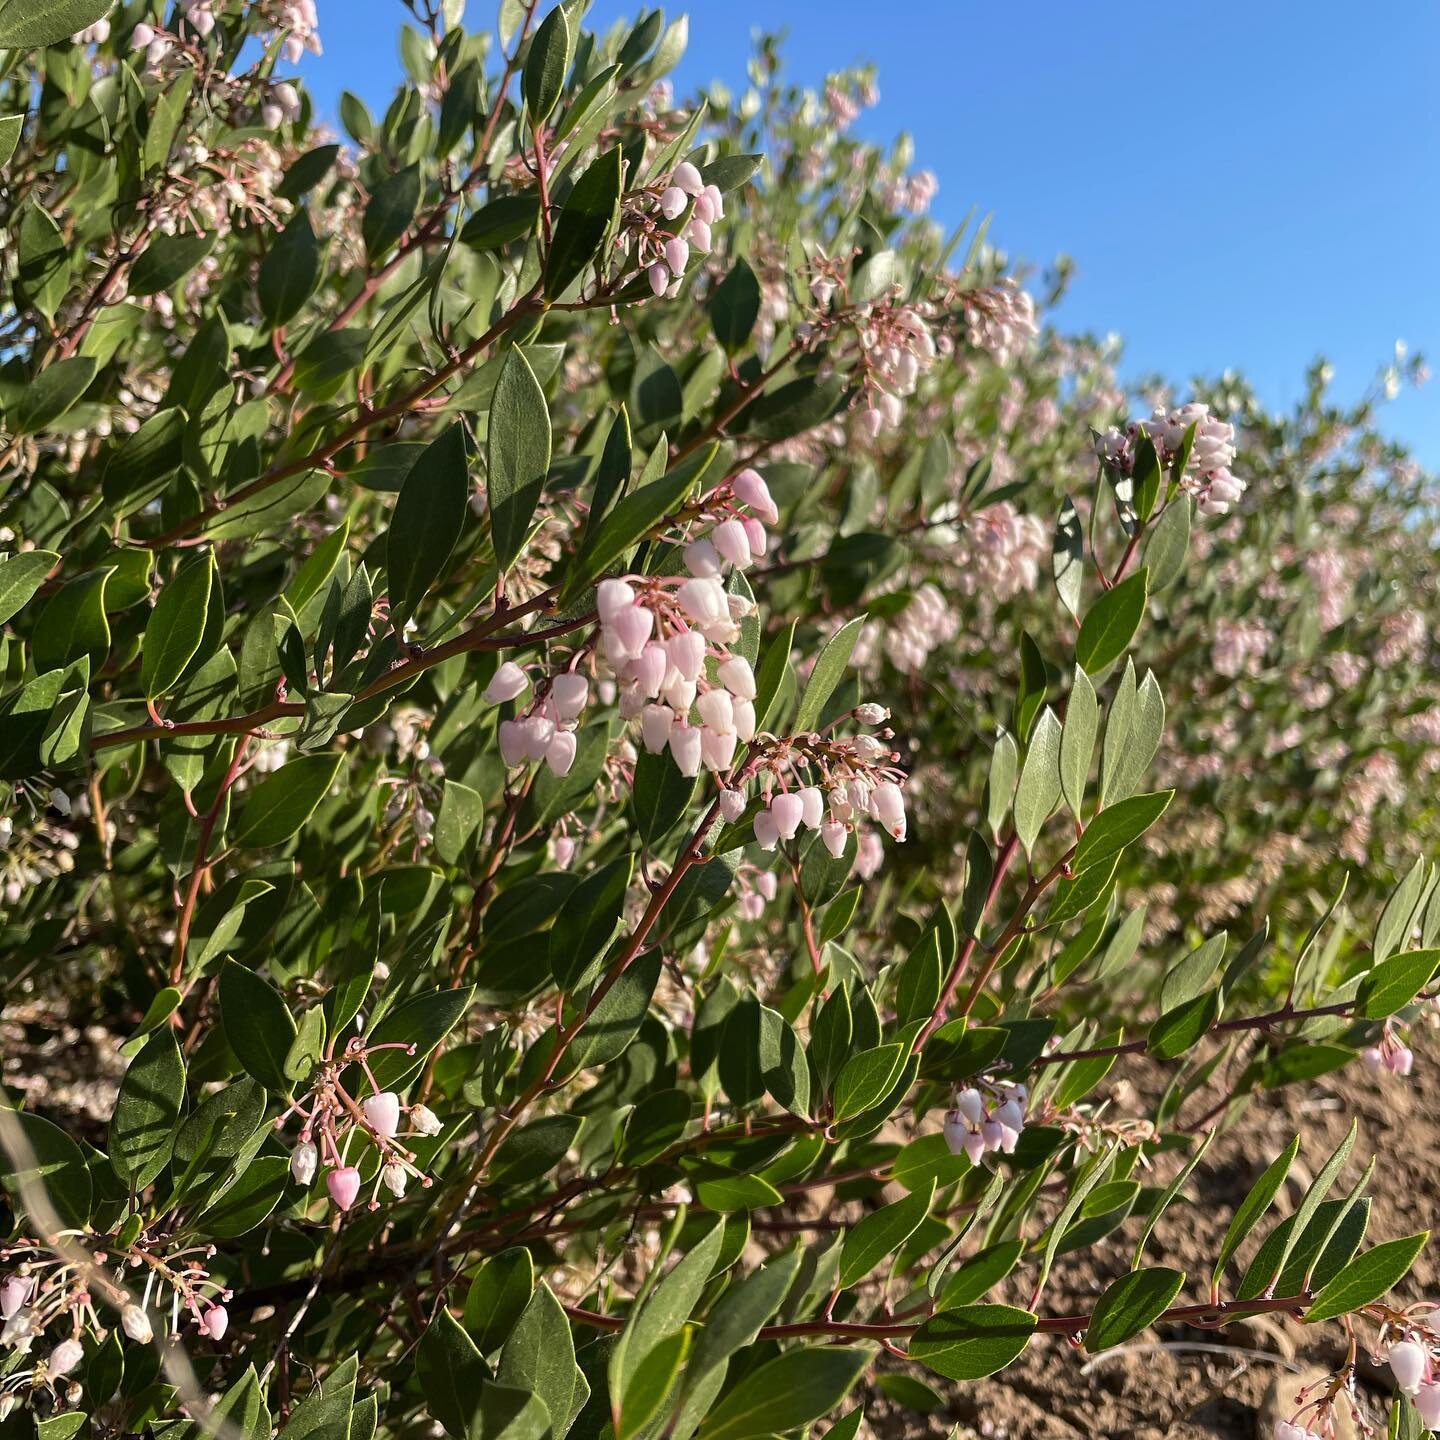 Arctostaphylos d. &lsquo;Howard McMinn&rsquo; this beautiful california native manzanita grows in form of a mound 5-8ft. tall and spreads, to 7 ft in 5 years. Great evergreen plant. We are happy to provide a variety of native plants to our state! #gr